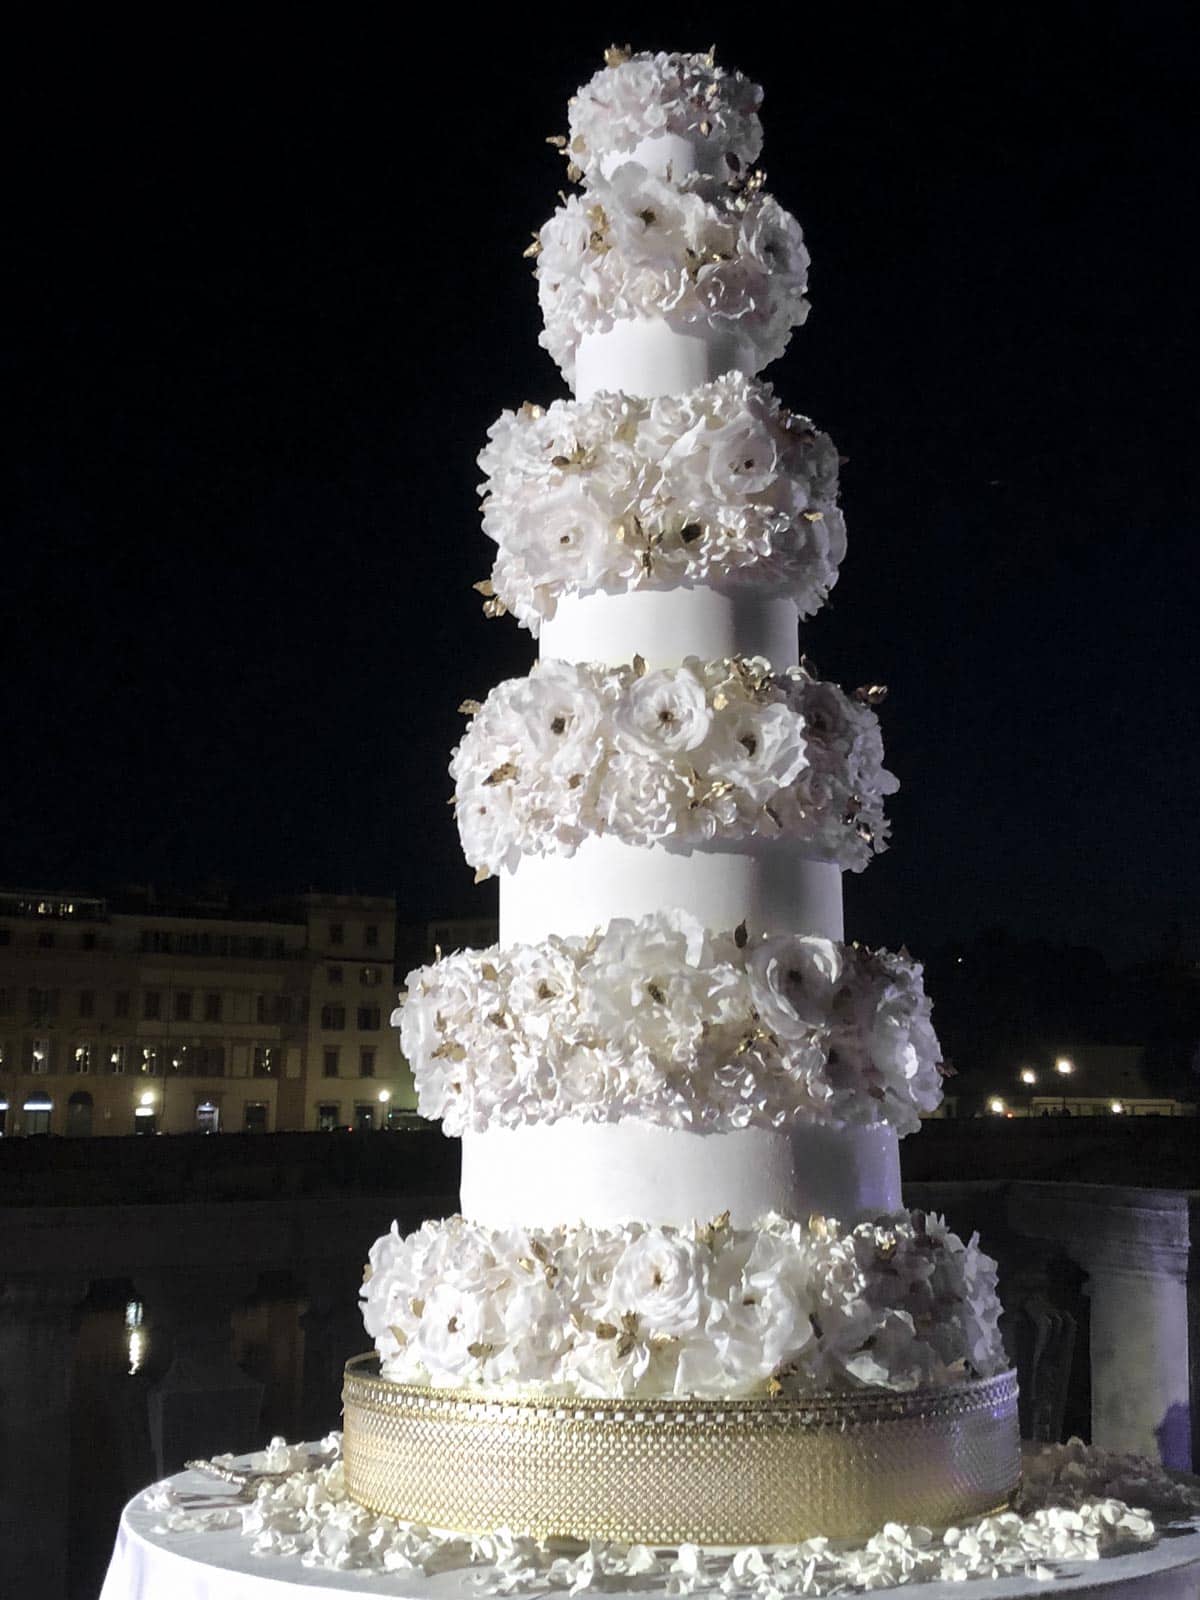 Magnificent white and gold wedding cake for Florence celebrity wedding, featured in Vogue